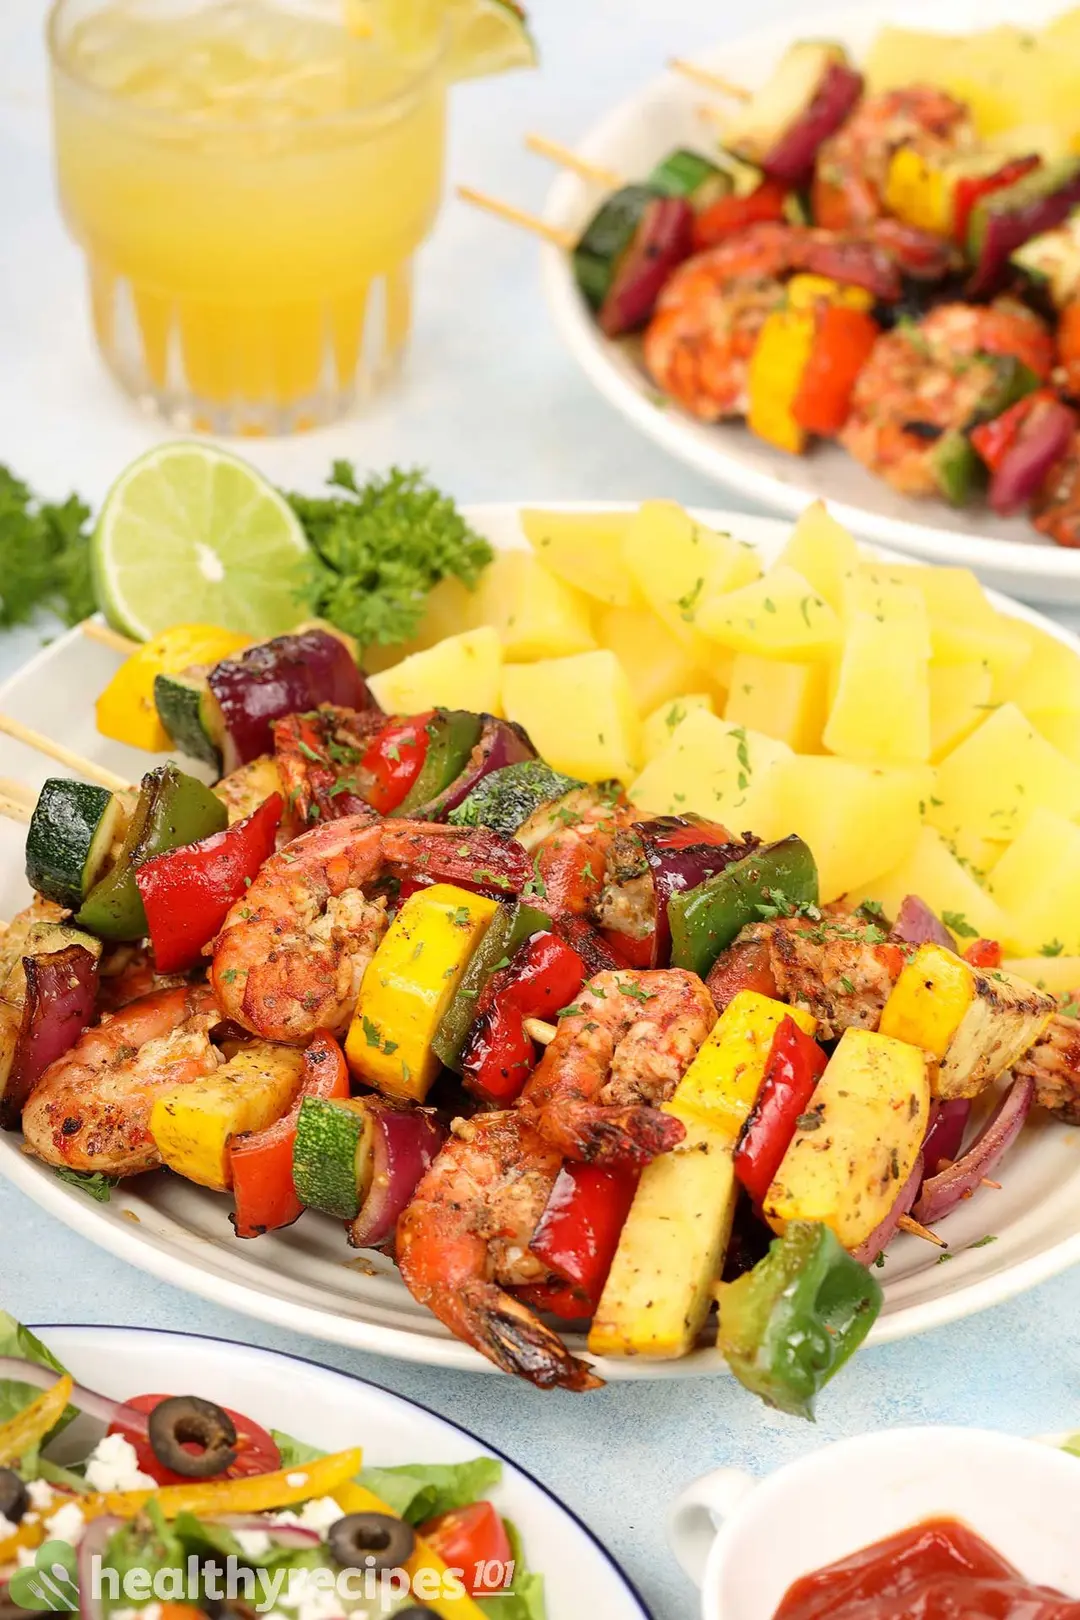 What to Serve With Shrimp Kabobs